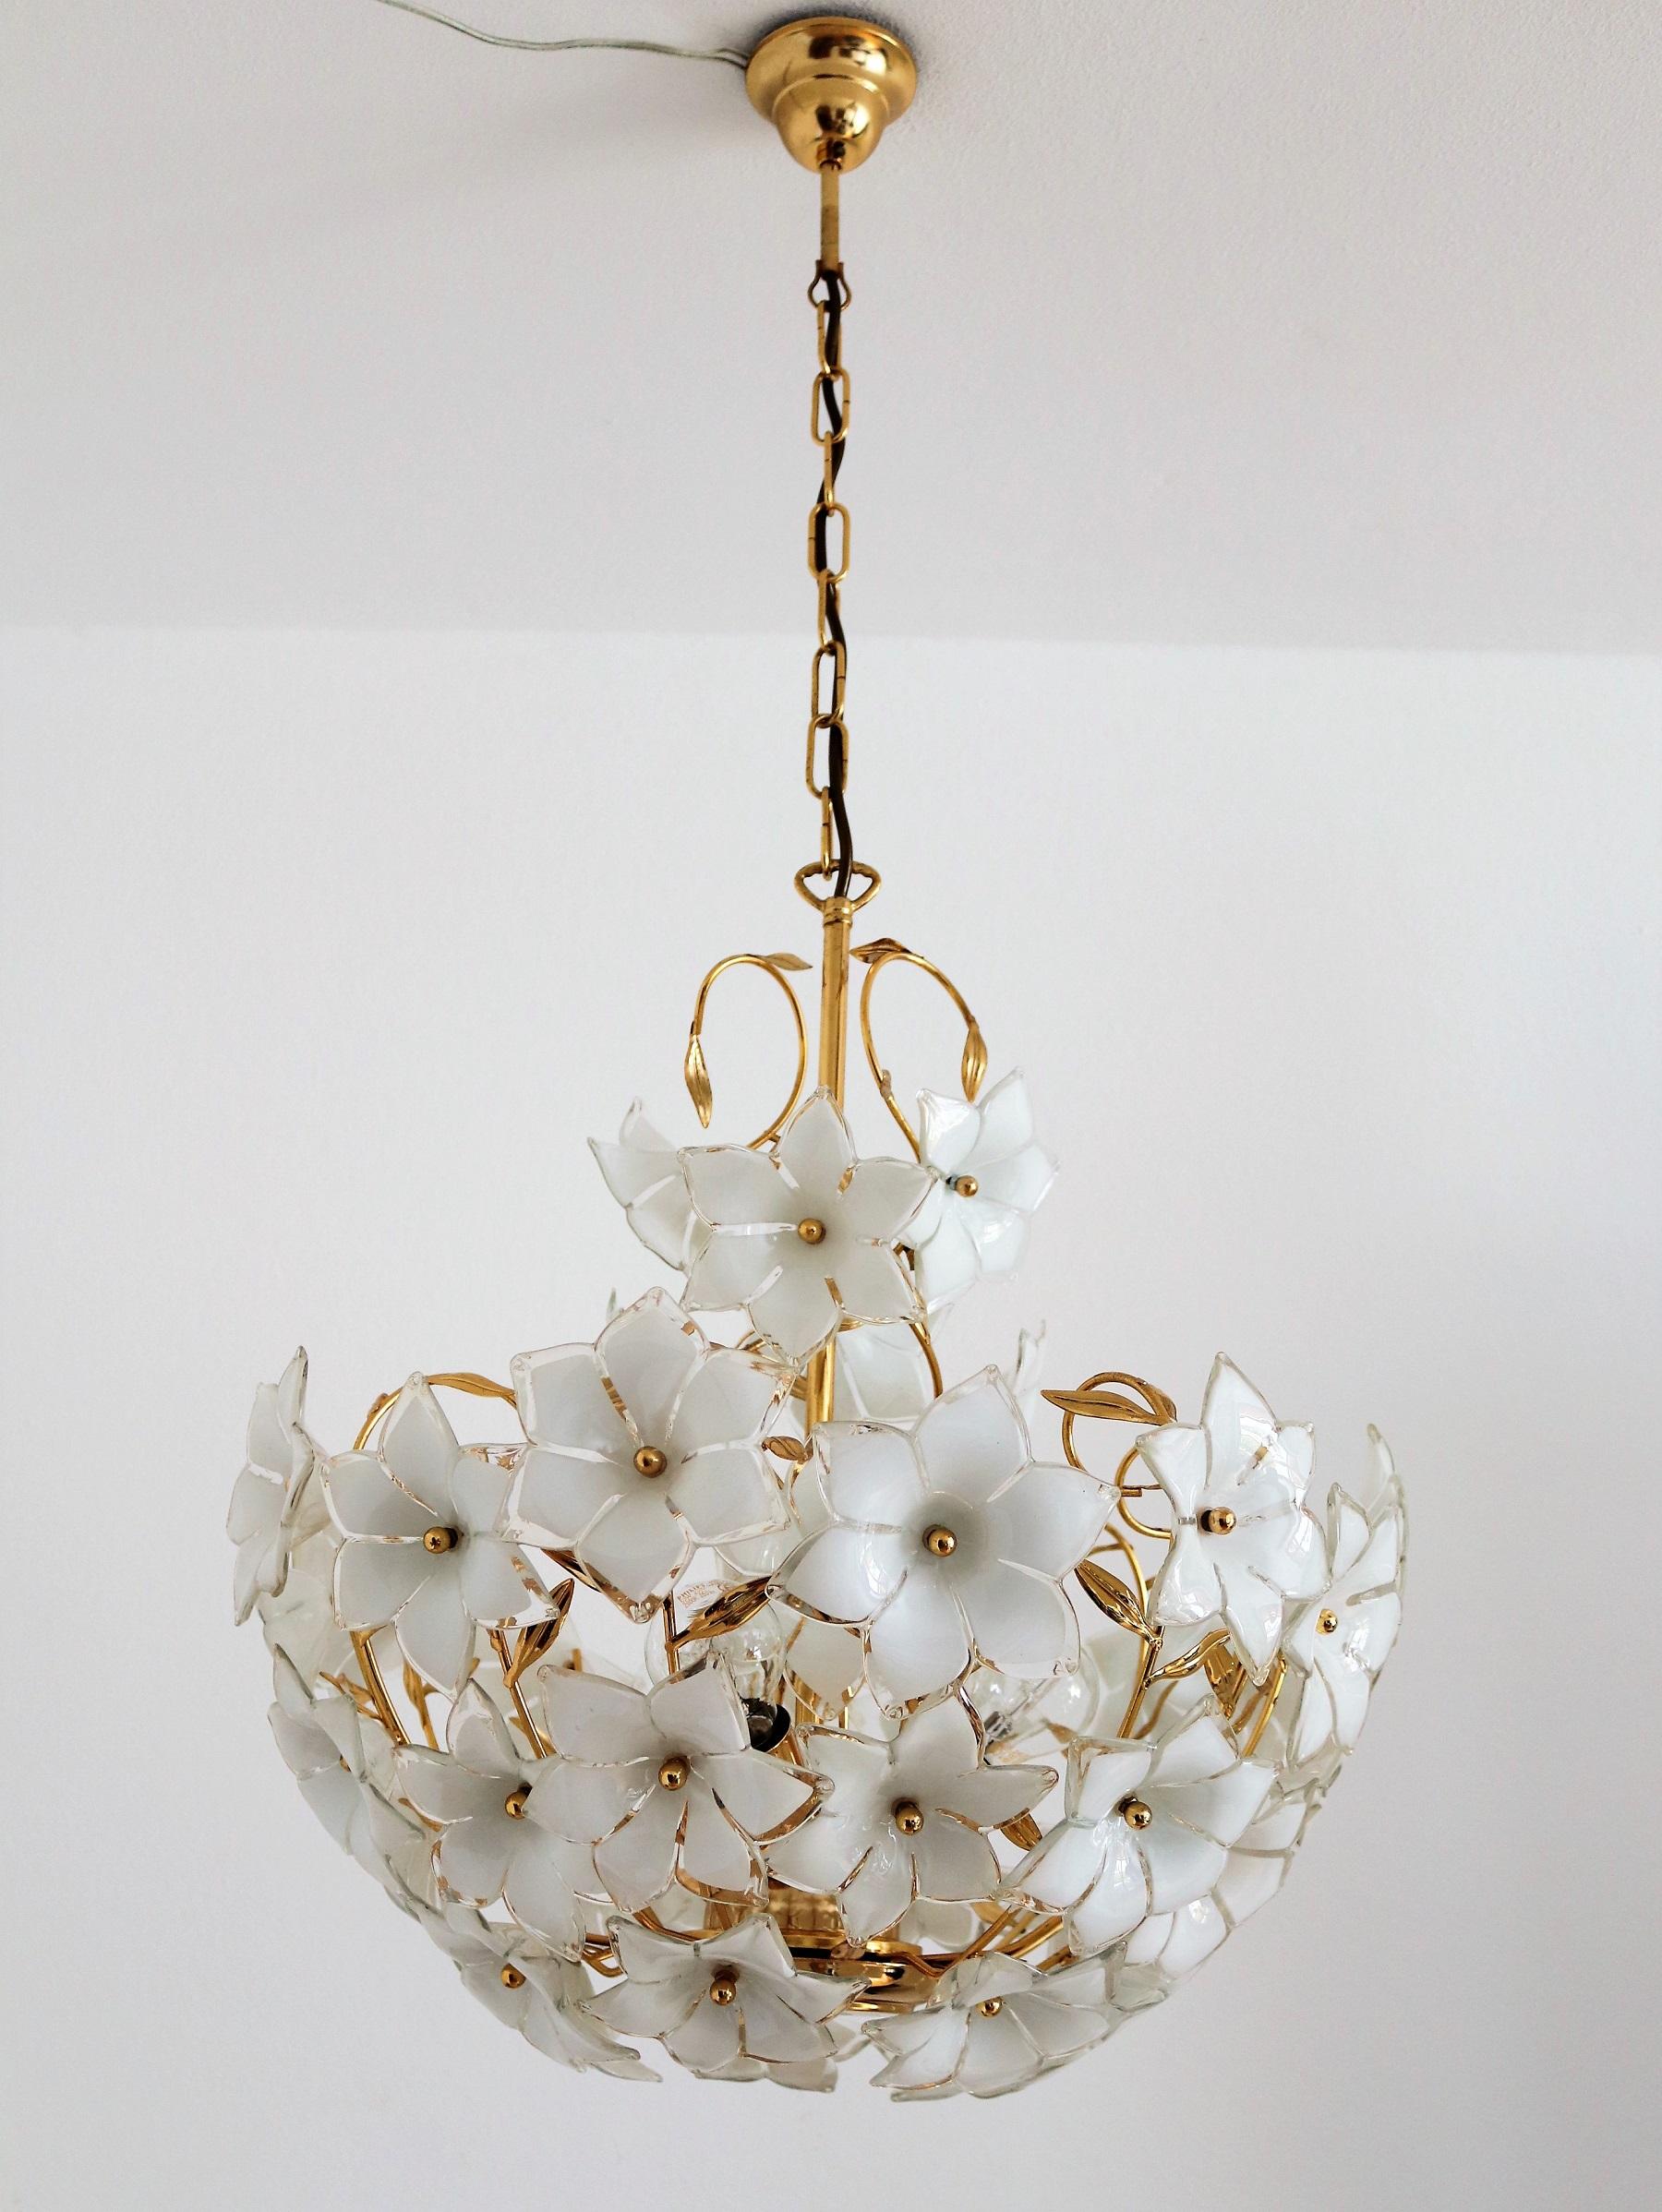 Late 20th Century Italian Vintage Murano Glass and Brass Chandelier with White Glass Flowers, 1970